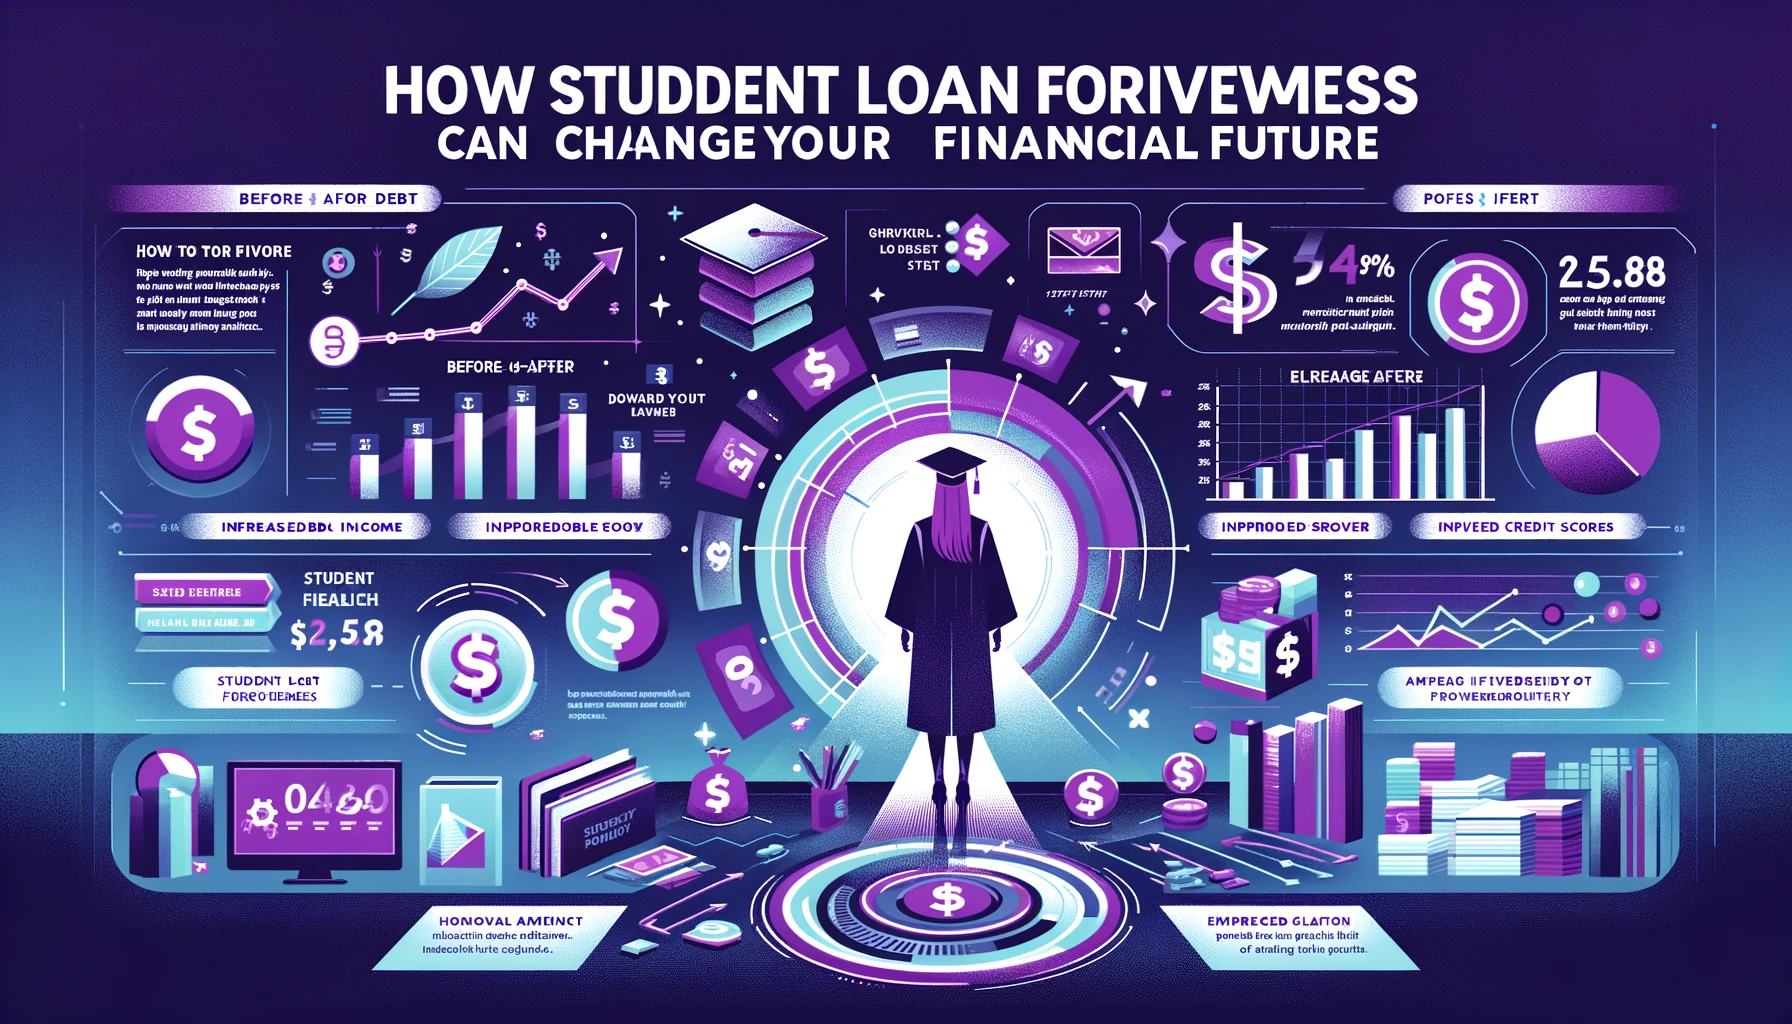 How Student Loan Forgiveness Can Change Your Financial Future